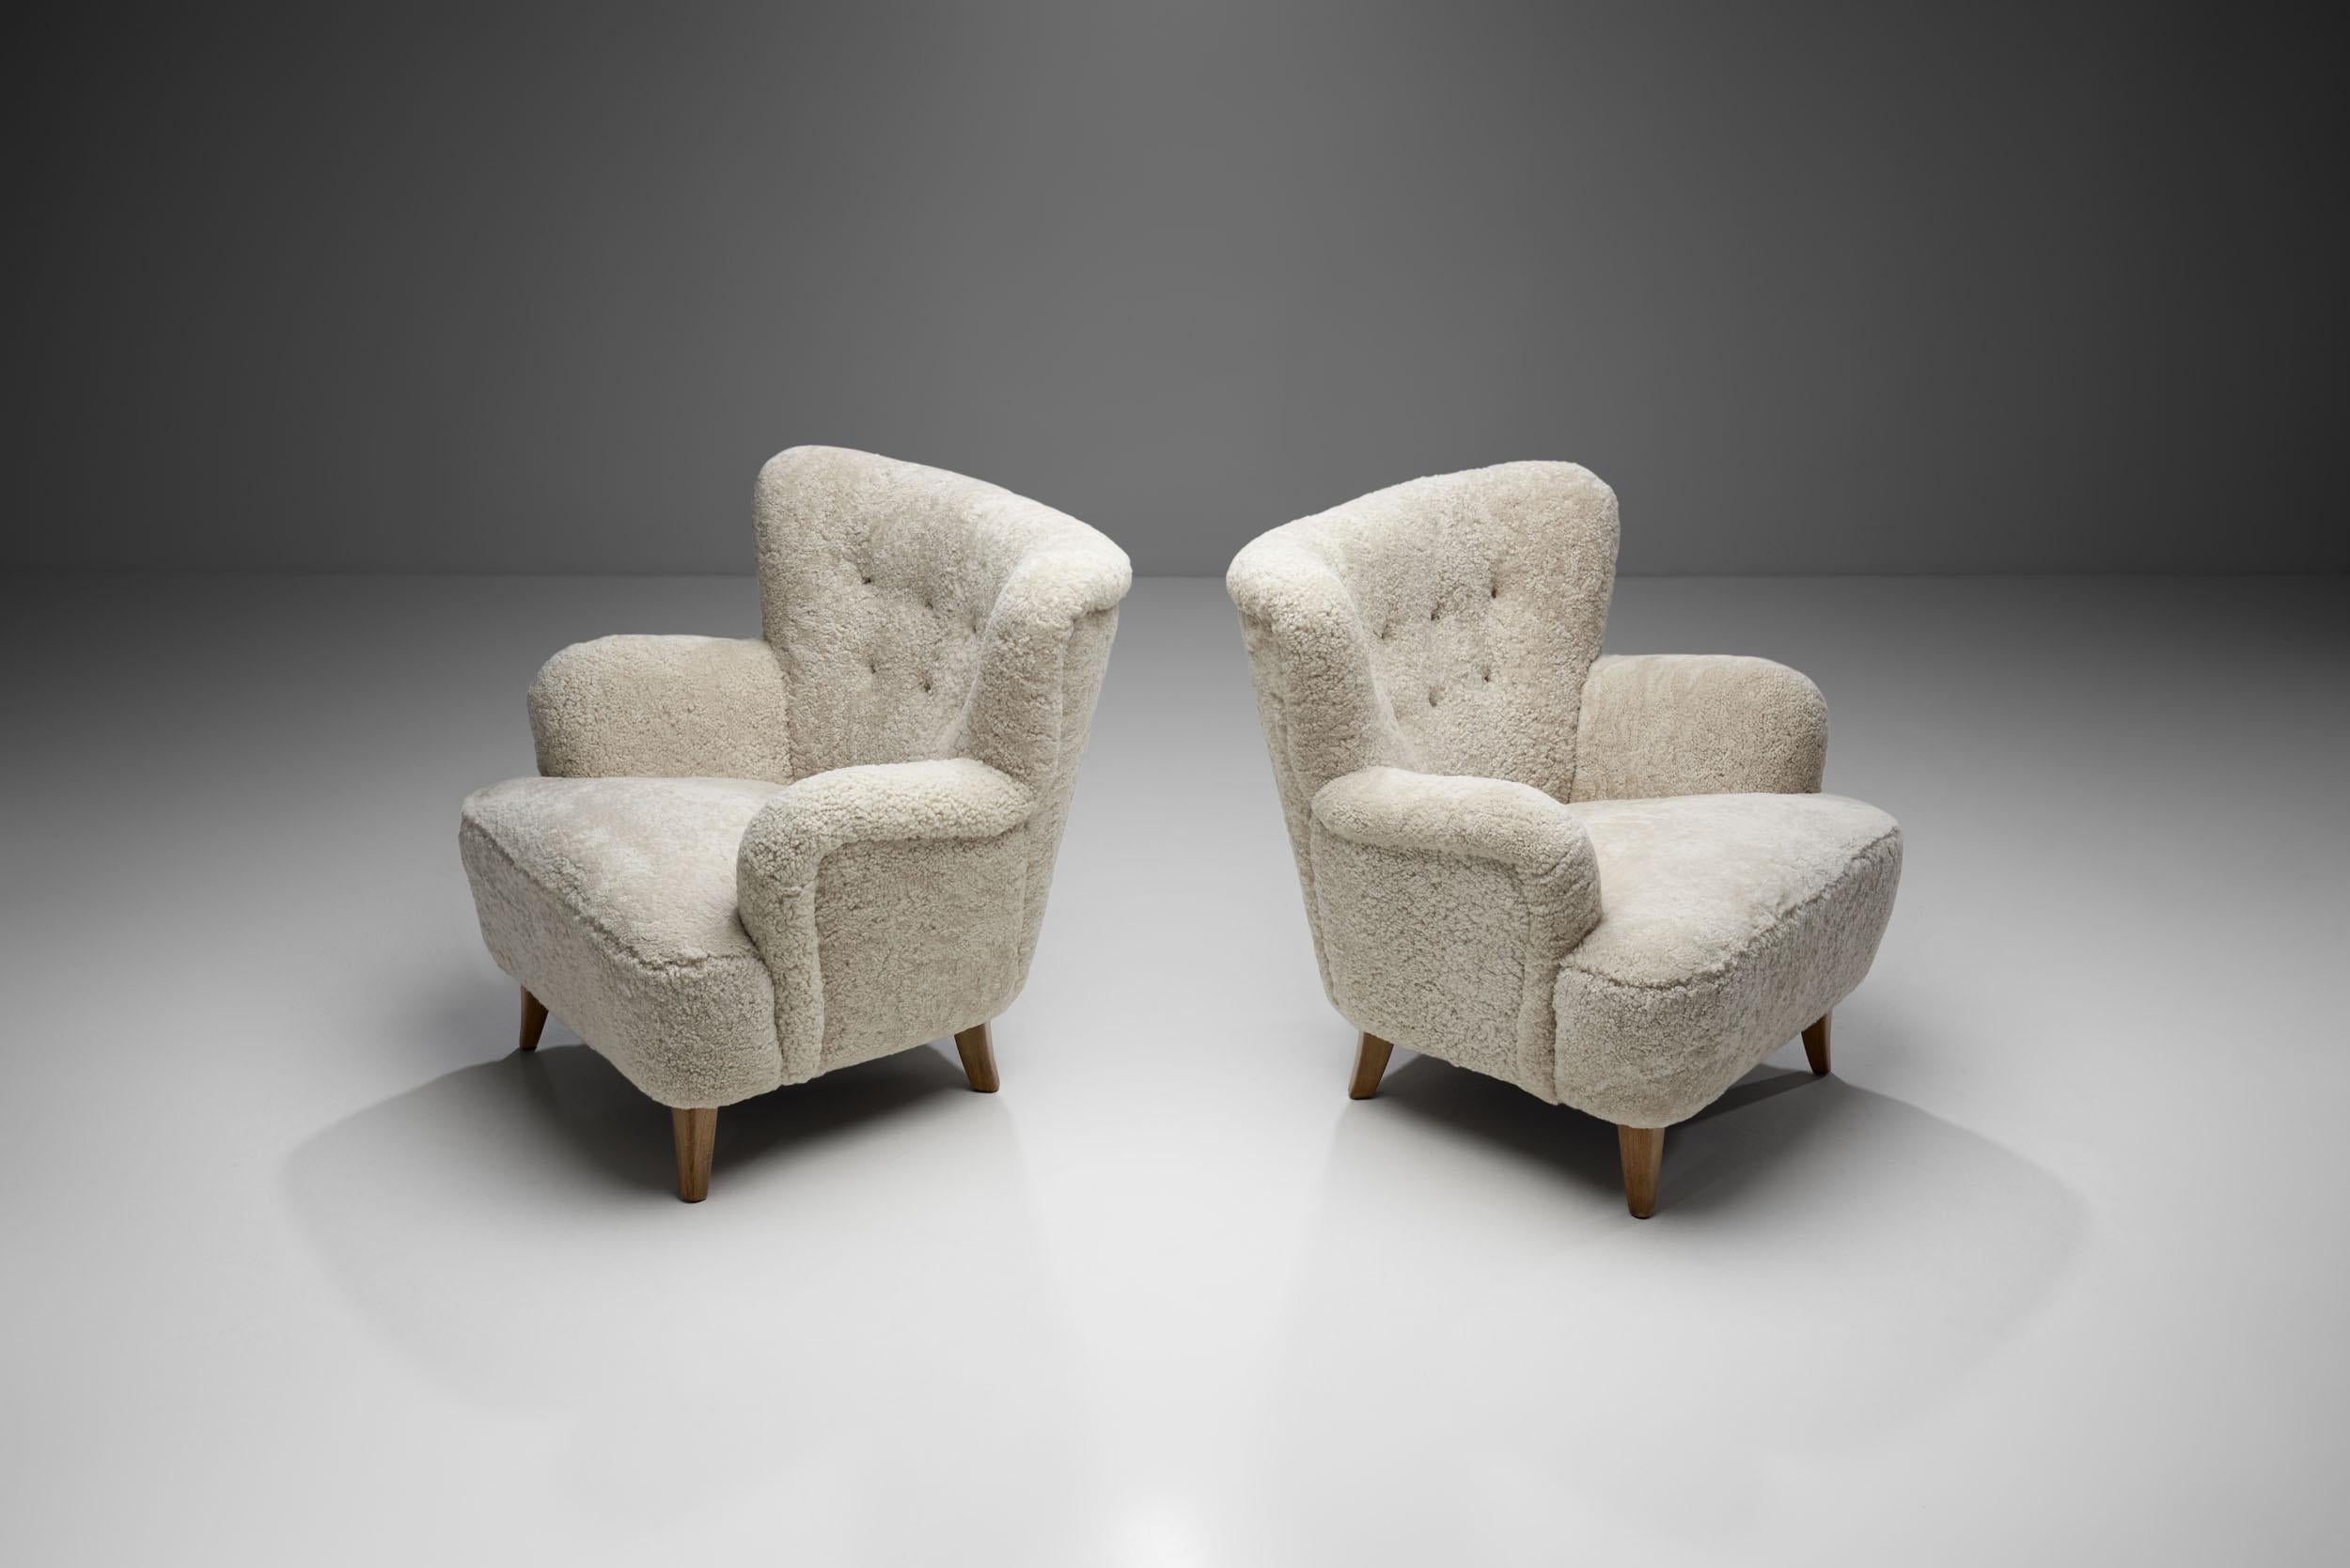 Pair of “Laila” Armchairs in Sheepskin by Ilmari Lappalainen, Finland 1948 In Good Condition For Sale In Utrecht, NL